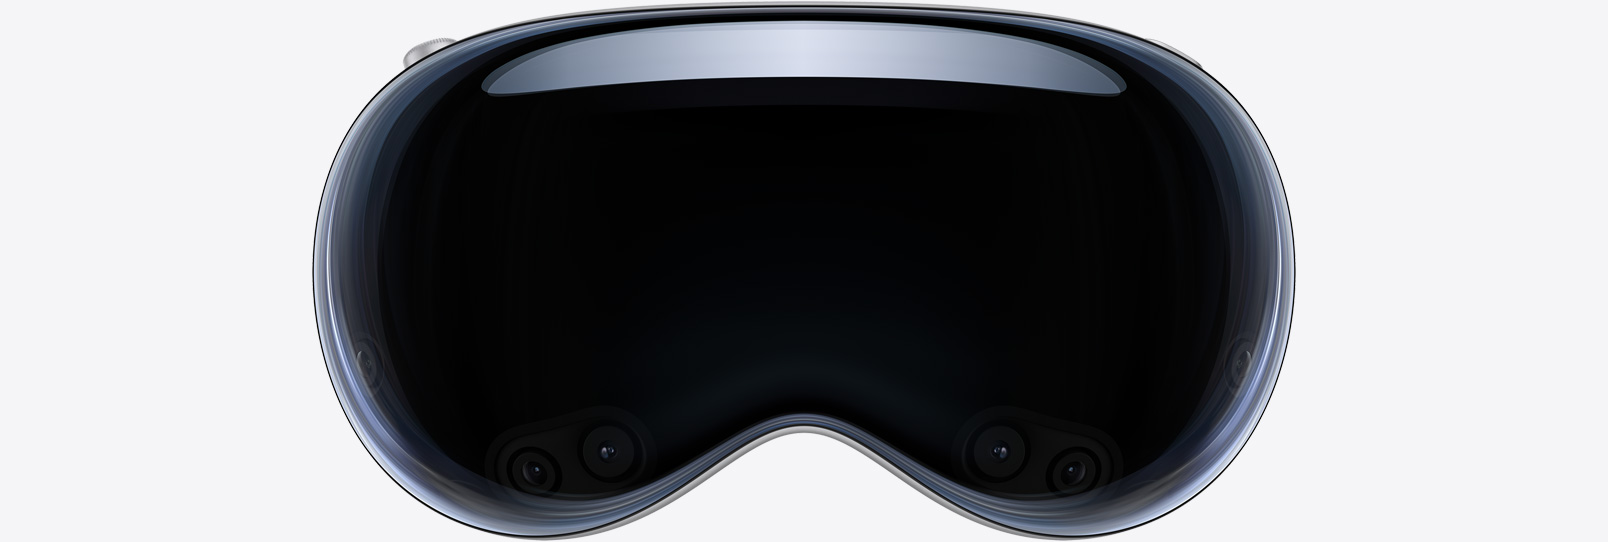 Front view of Apple Vision Pro showing glass and enclosure